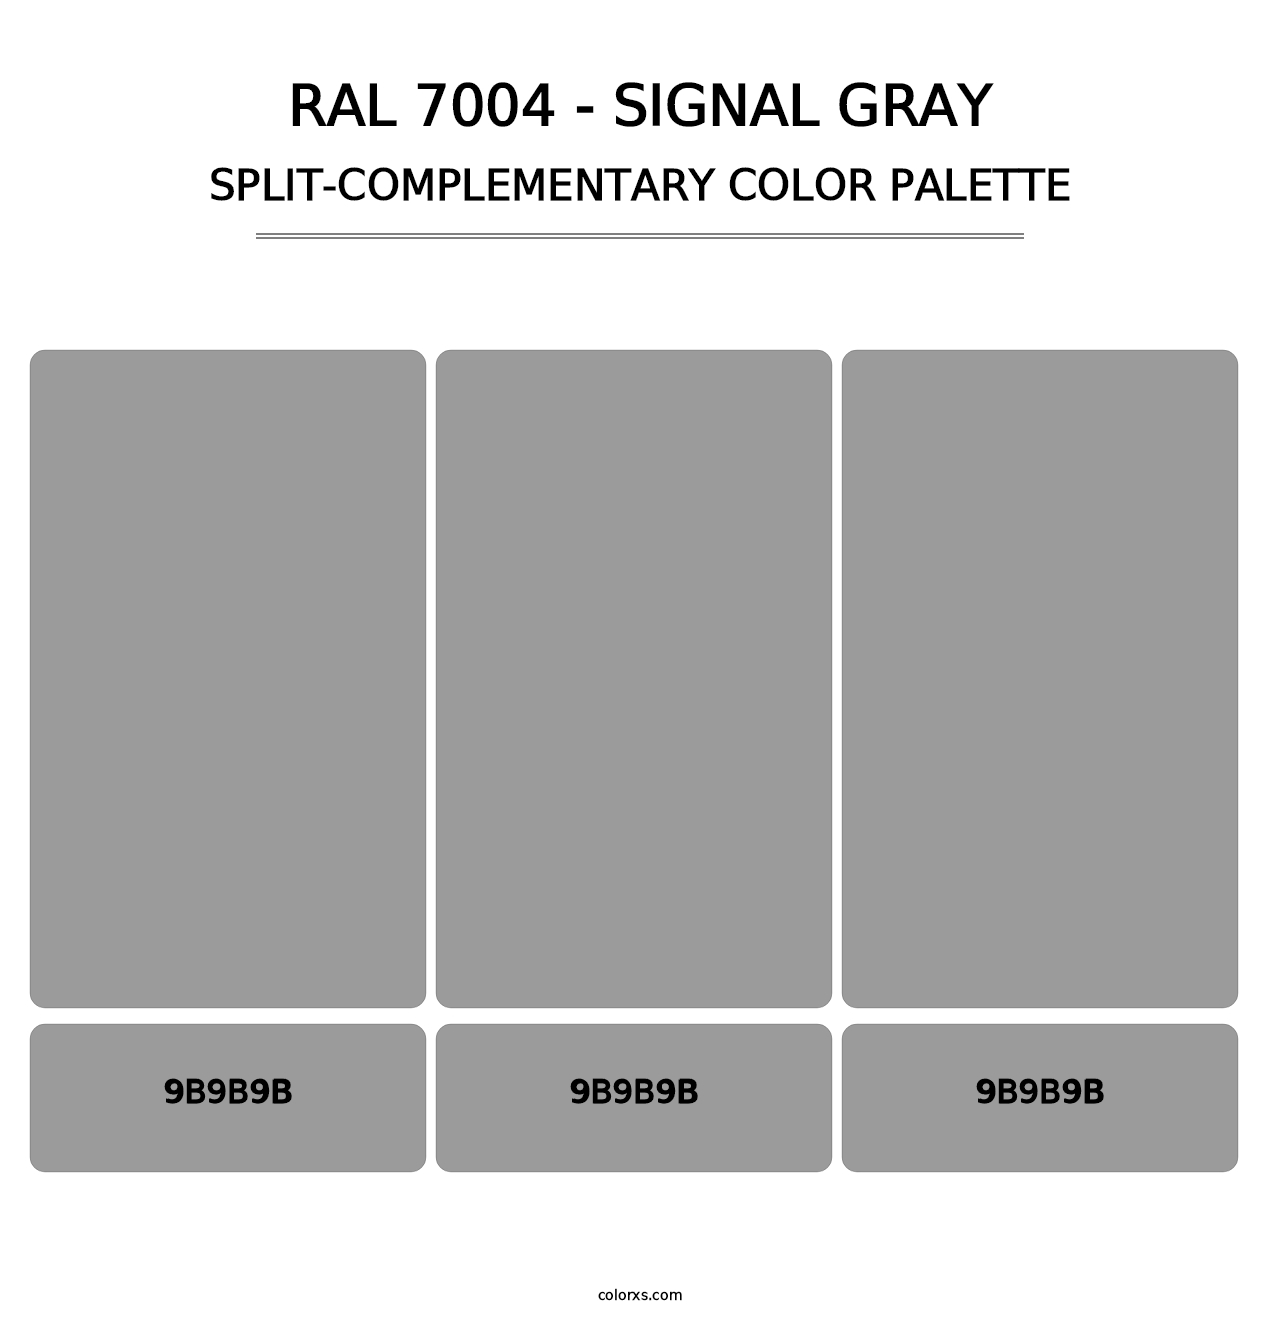 RAL 7004 - Signal Gray - Split-Complementary Color Palette